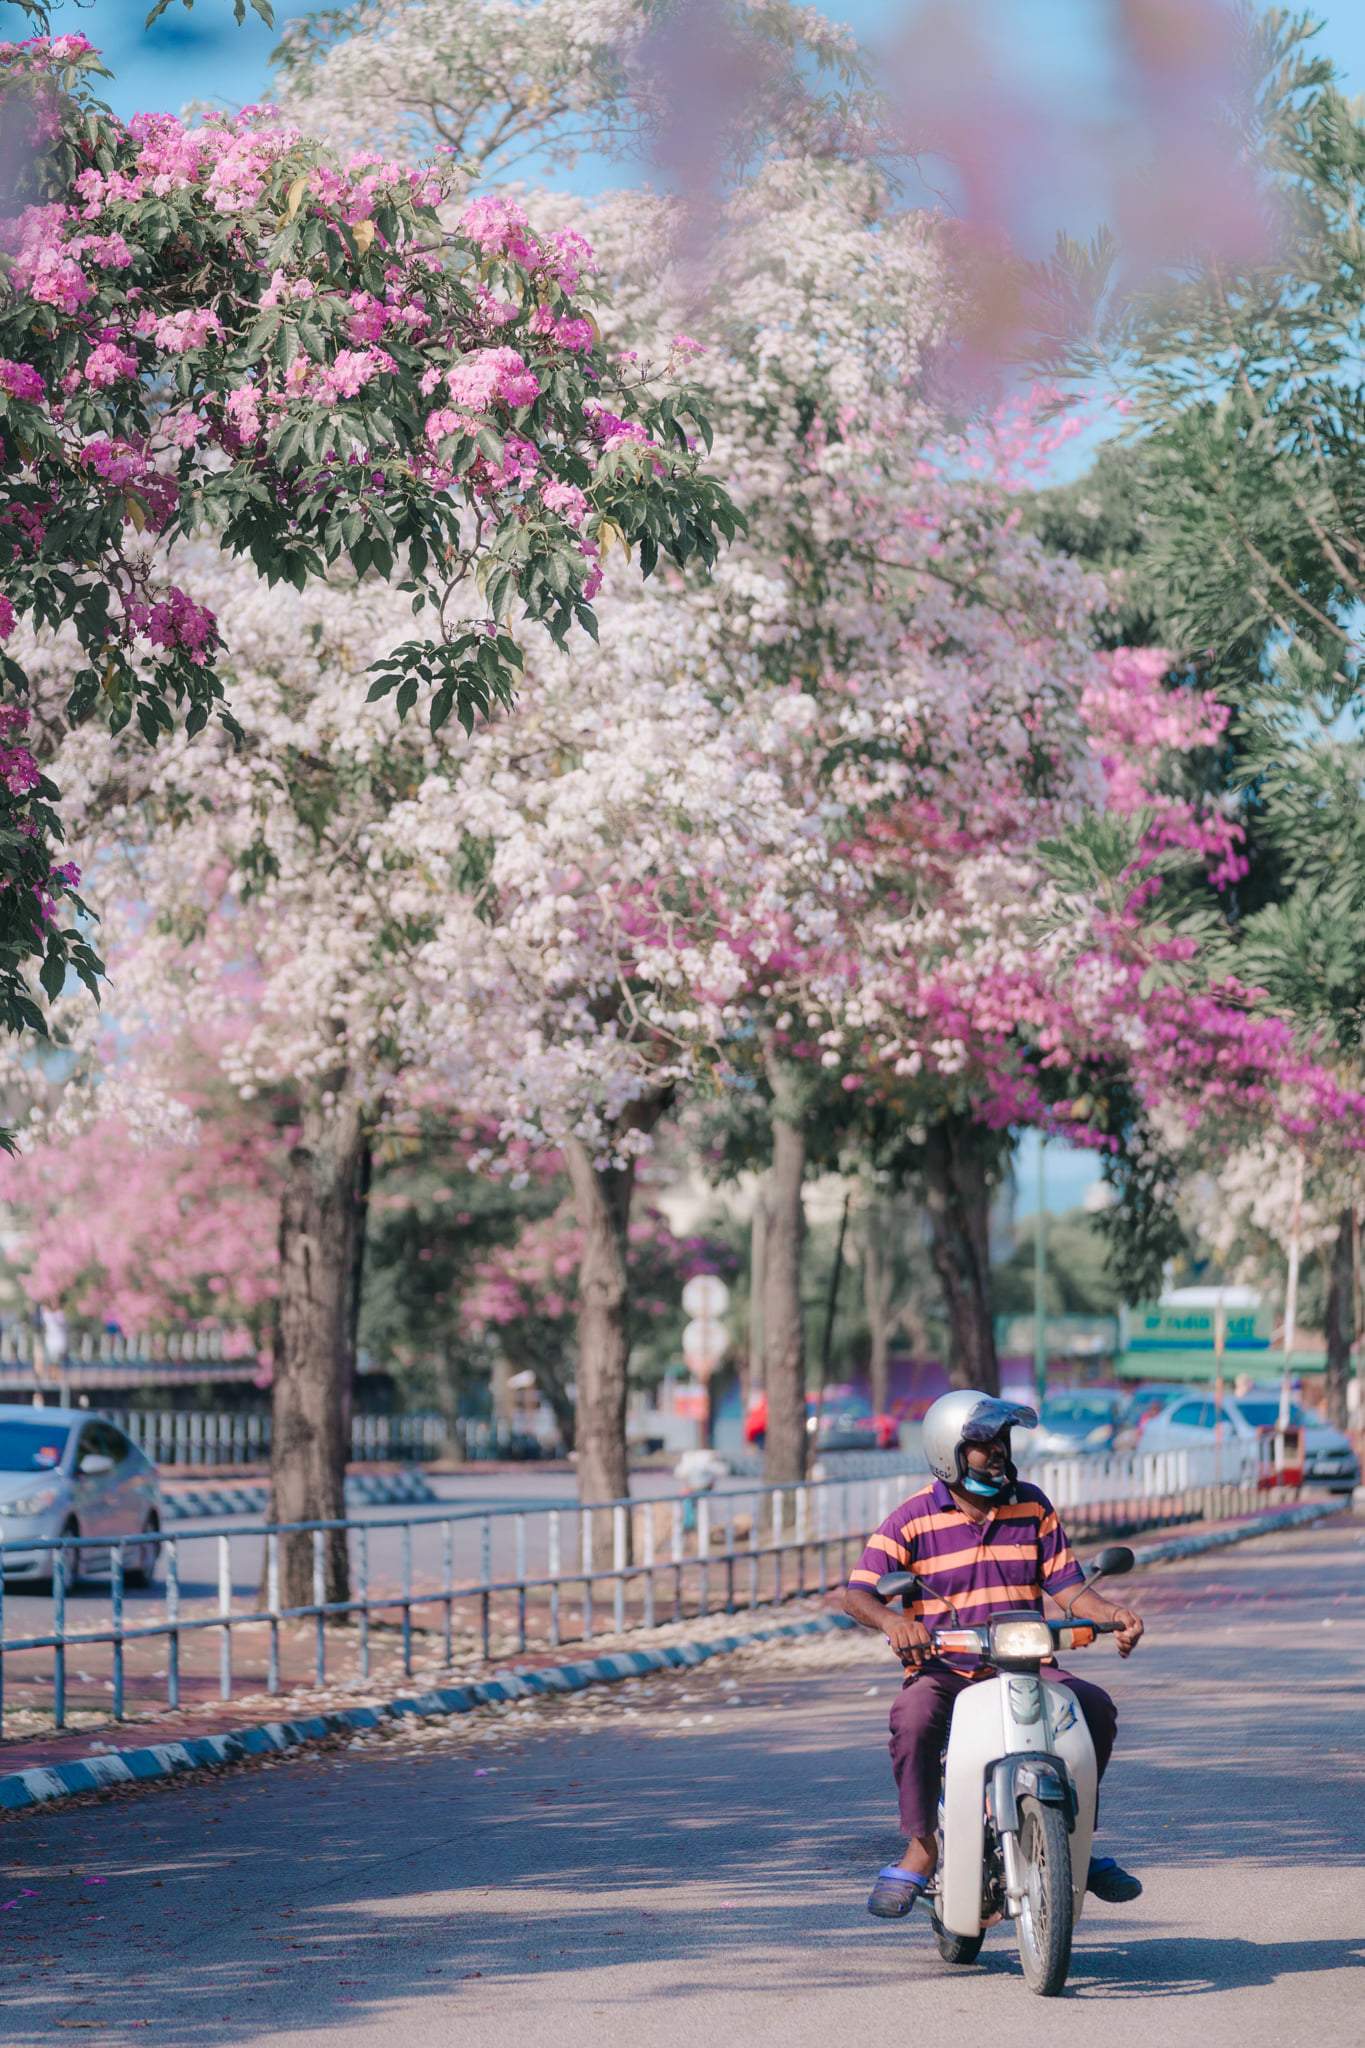 Images of "sakura"-like flowers blooming in malaysia leave netizens amazed